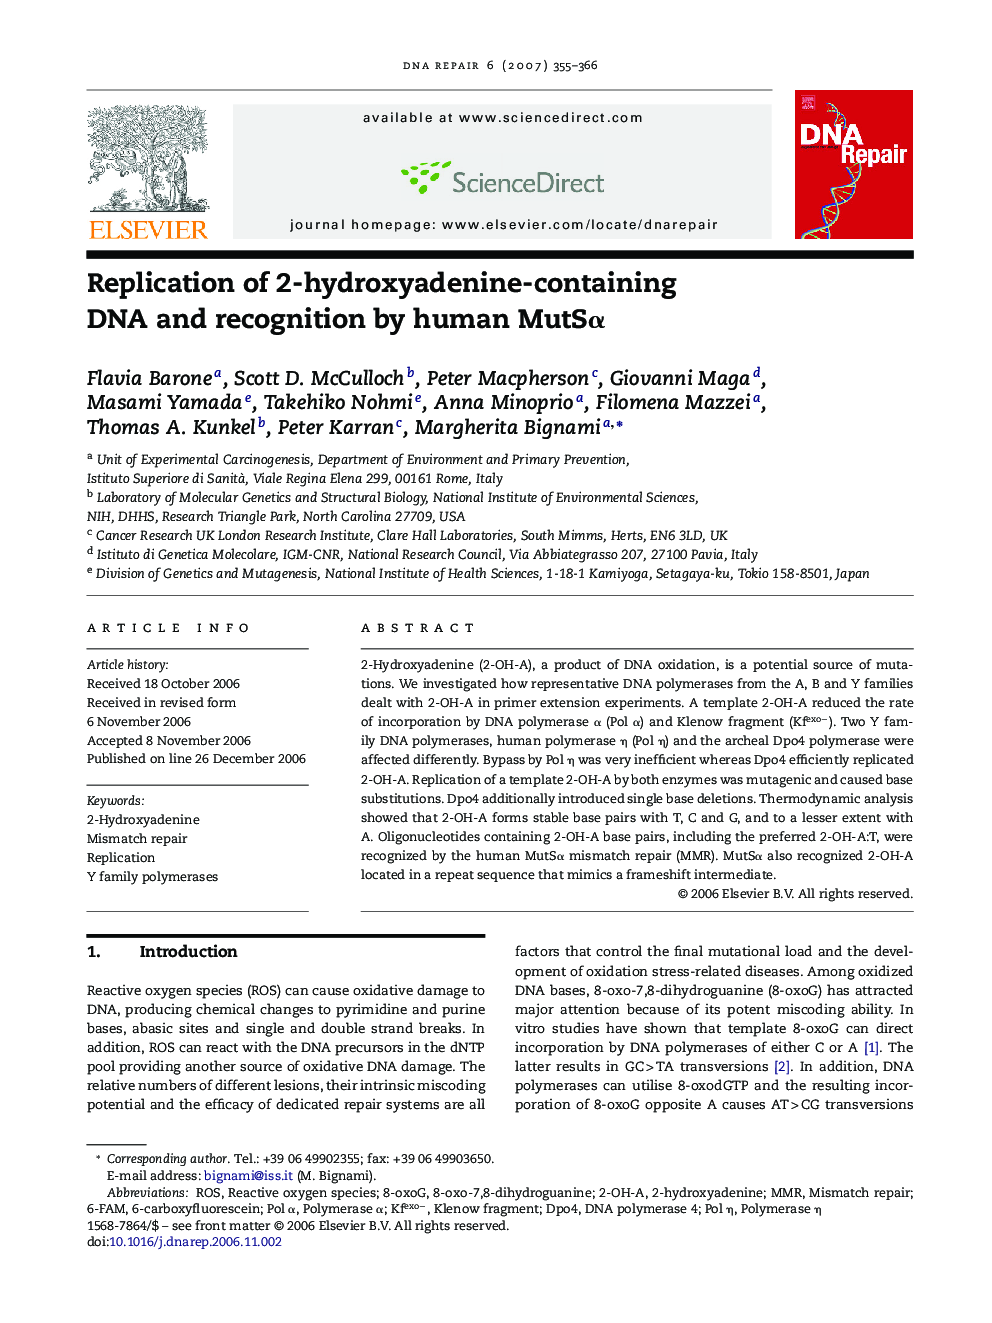 Replication of 2-hydroxyadenine-containing DNA and recognition by human MutSα